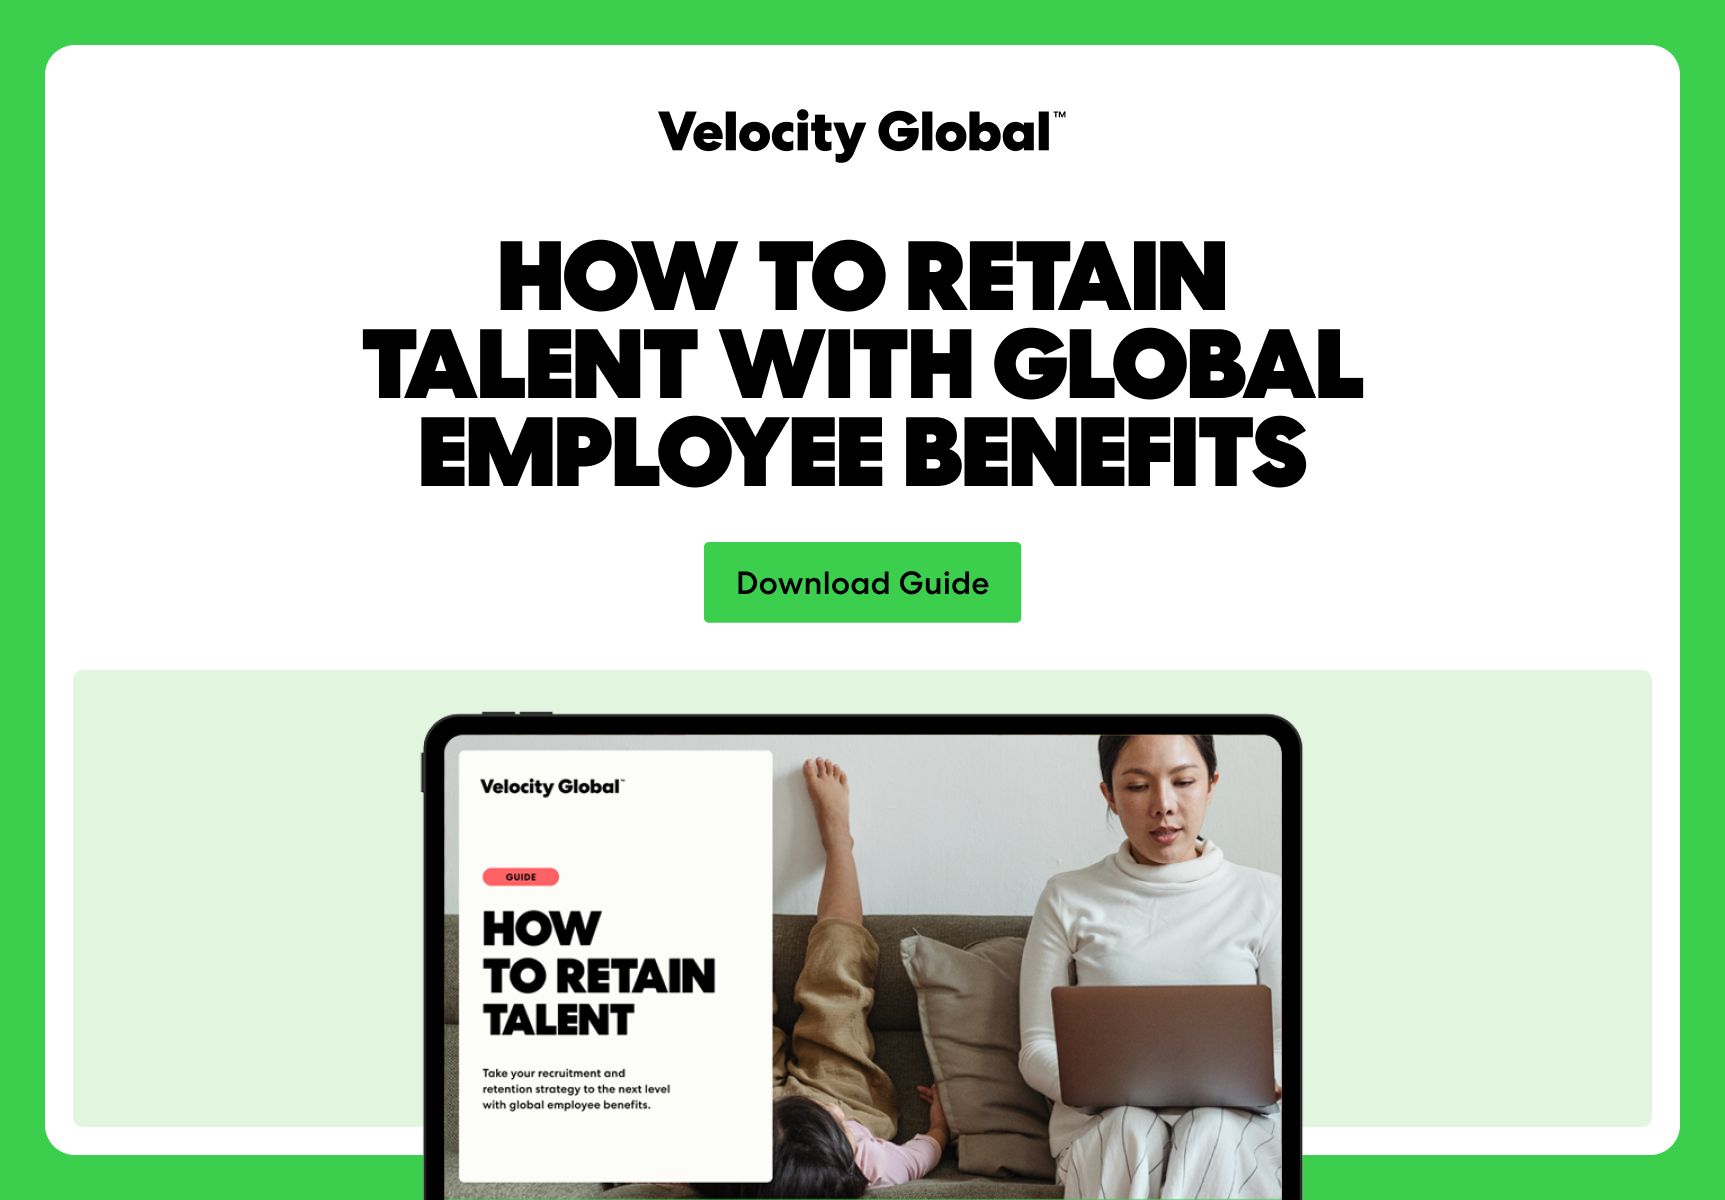 Guide on how to attract and retain top talent with the right benefits packages